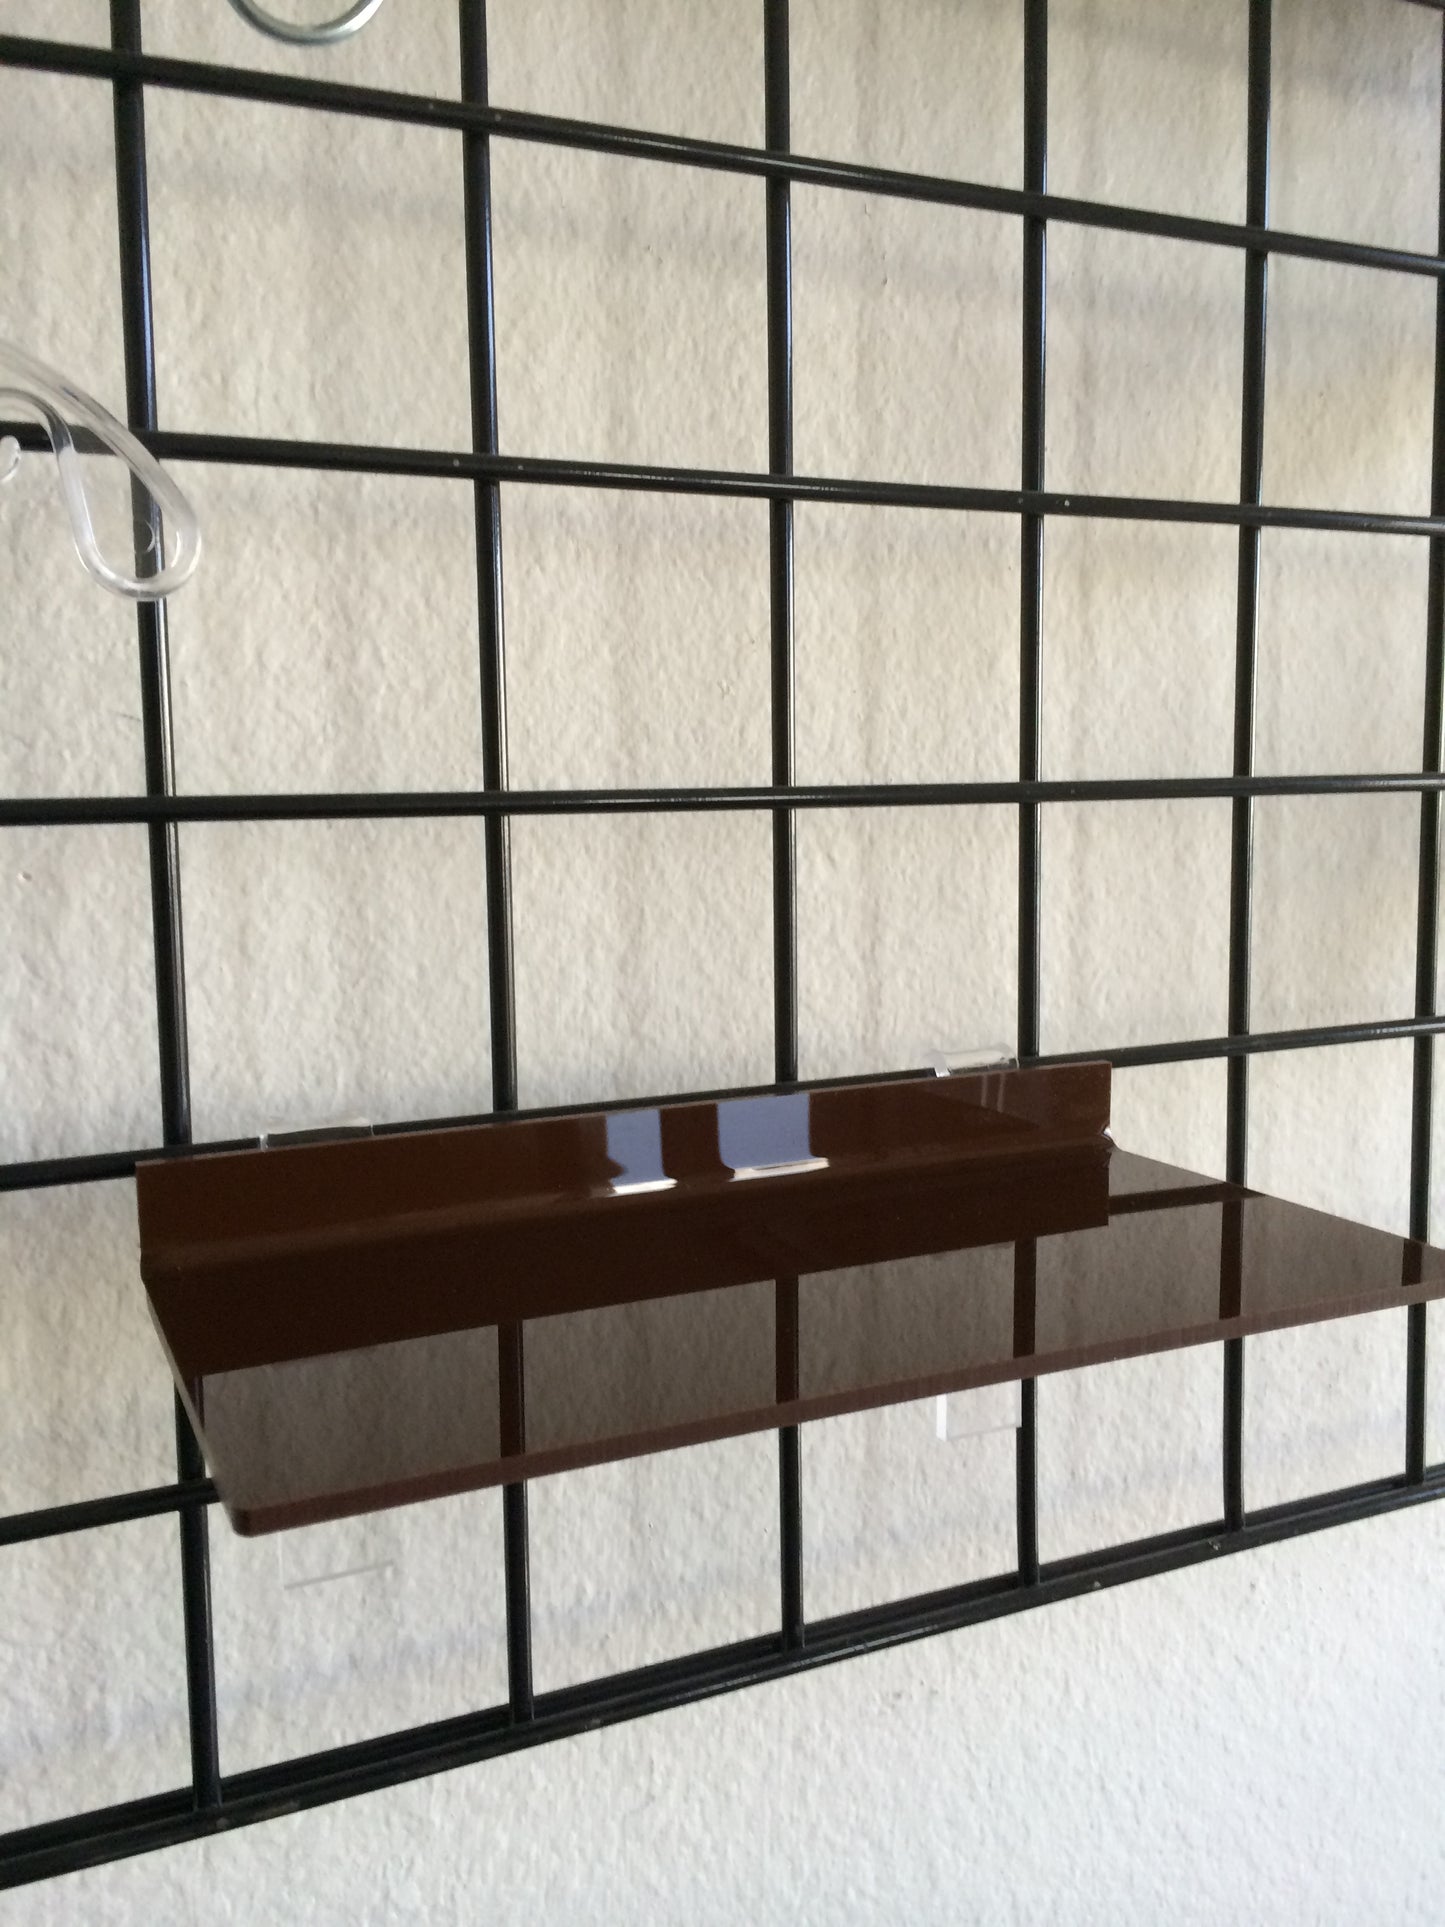 Gridwall Shelf - Color or clear